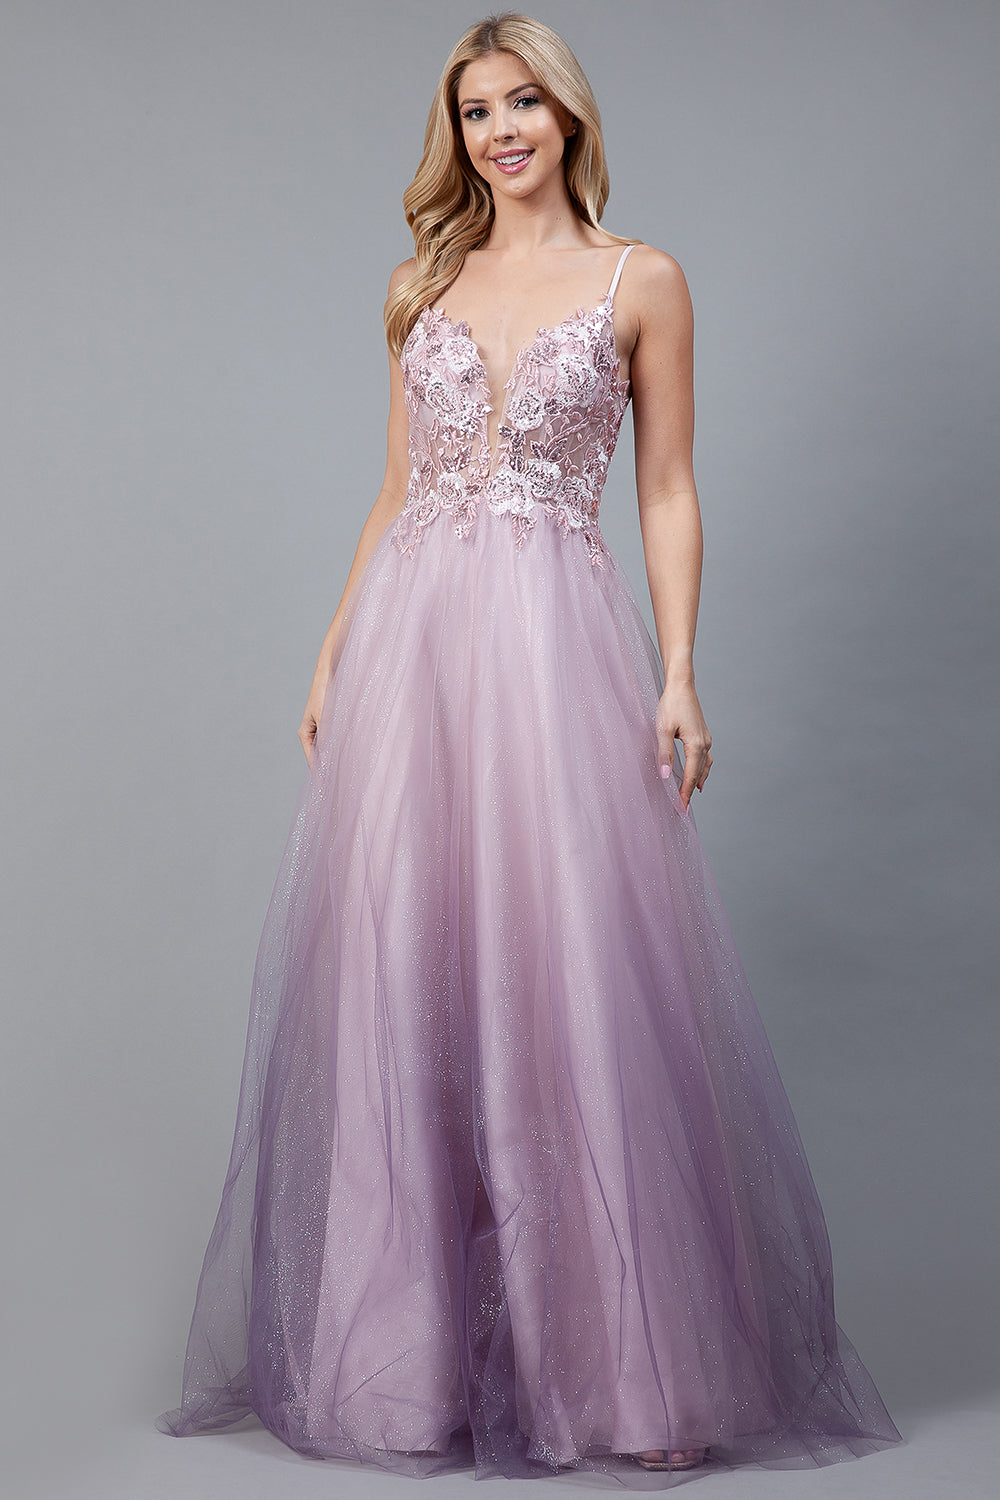 Embroidered Lace Bodice Tulle Glittering Skirt Long Prom Dress AC5040-Prom Dress-smcfashion.com